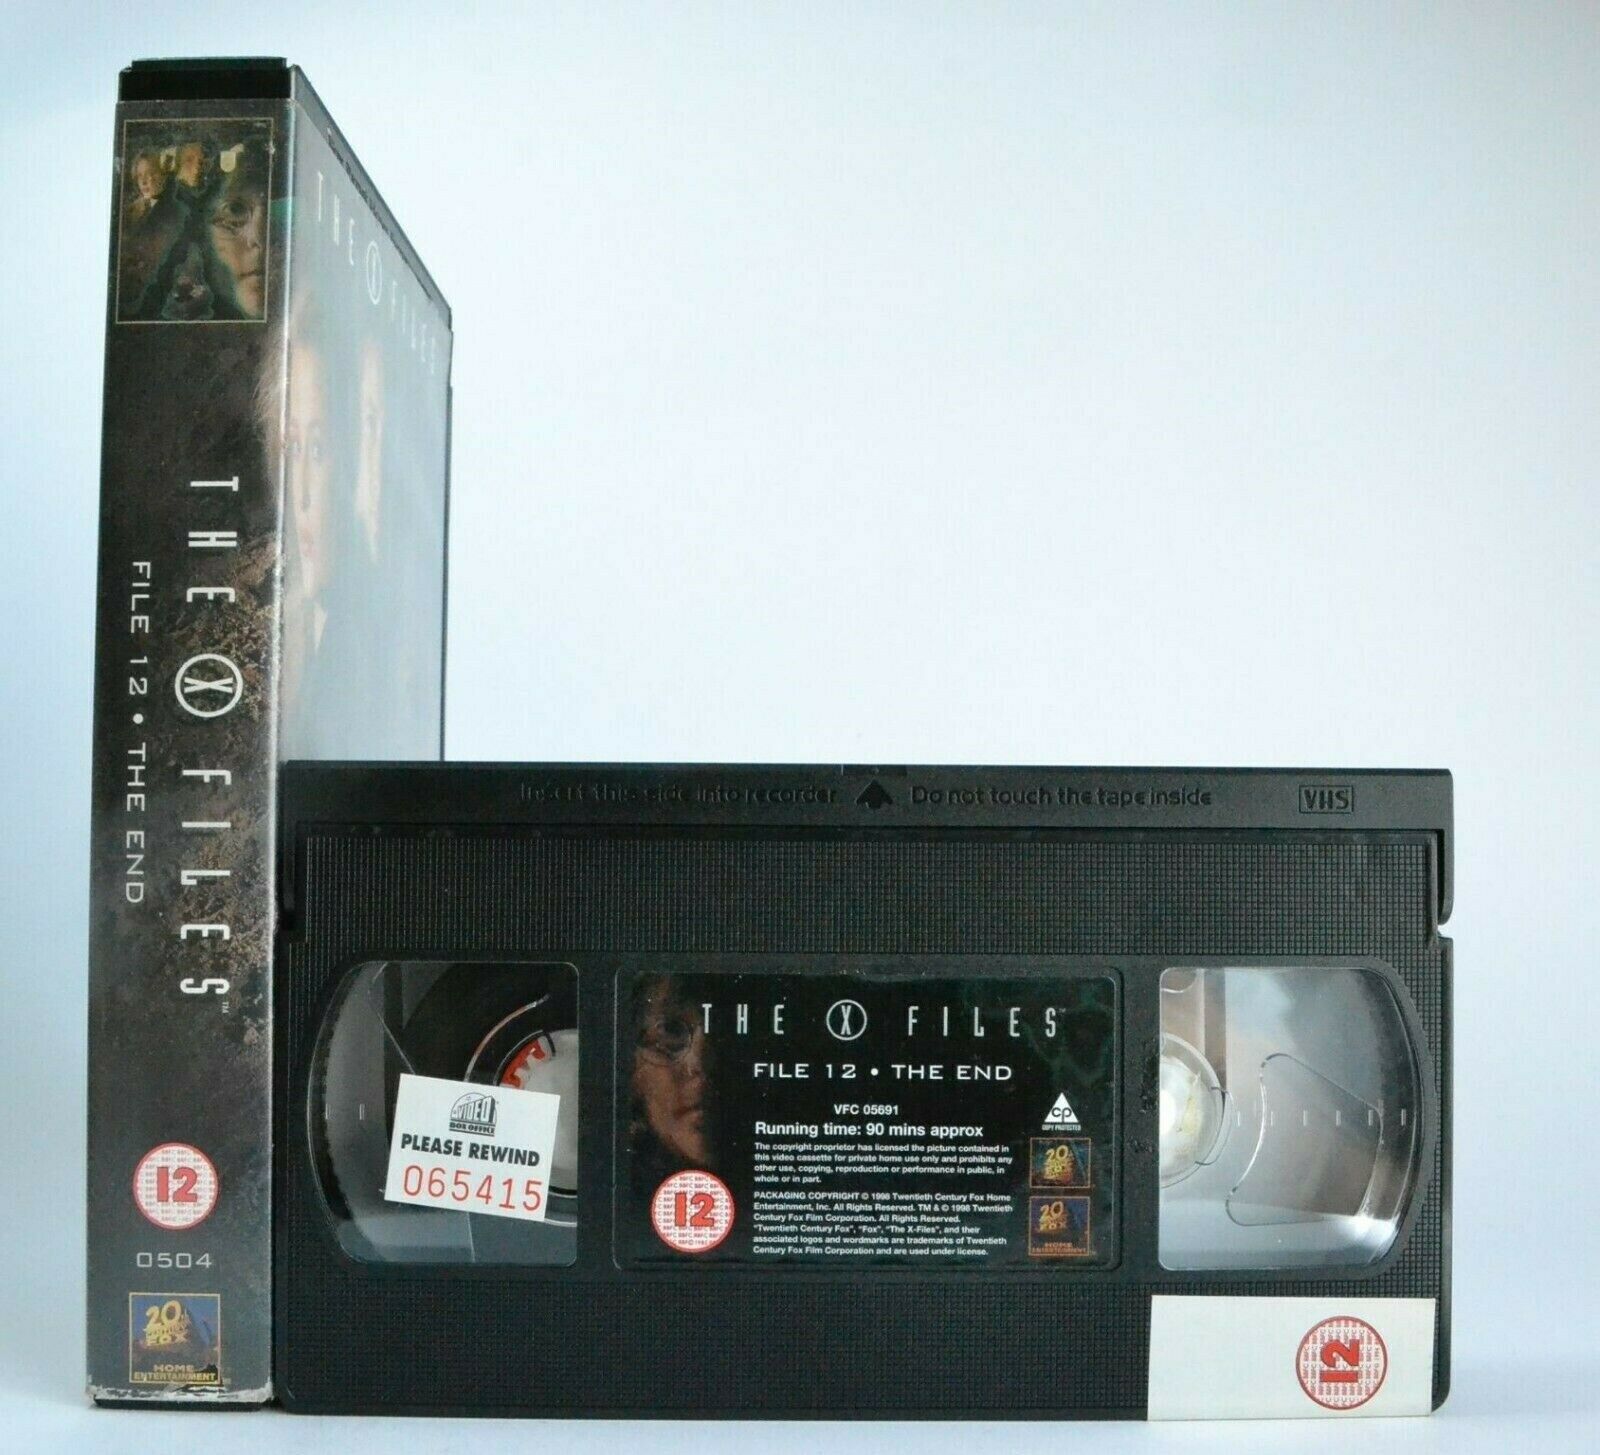 The X-Files: The End (1998) - Sci-Fi - TV Series - The Truth Is Out There - VHS-